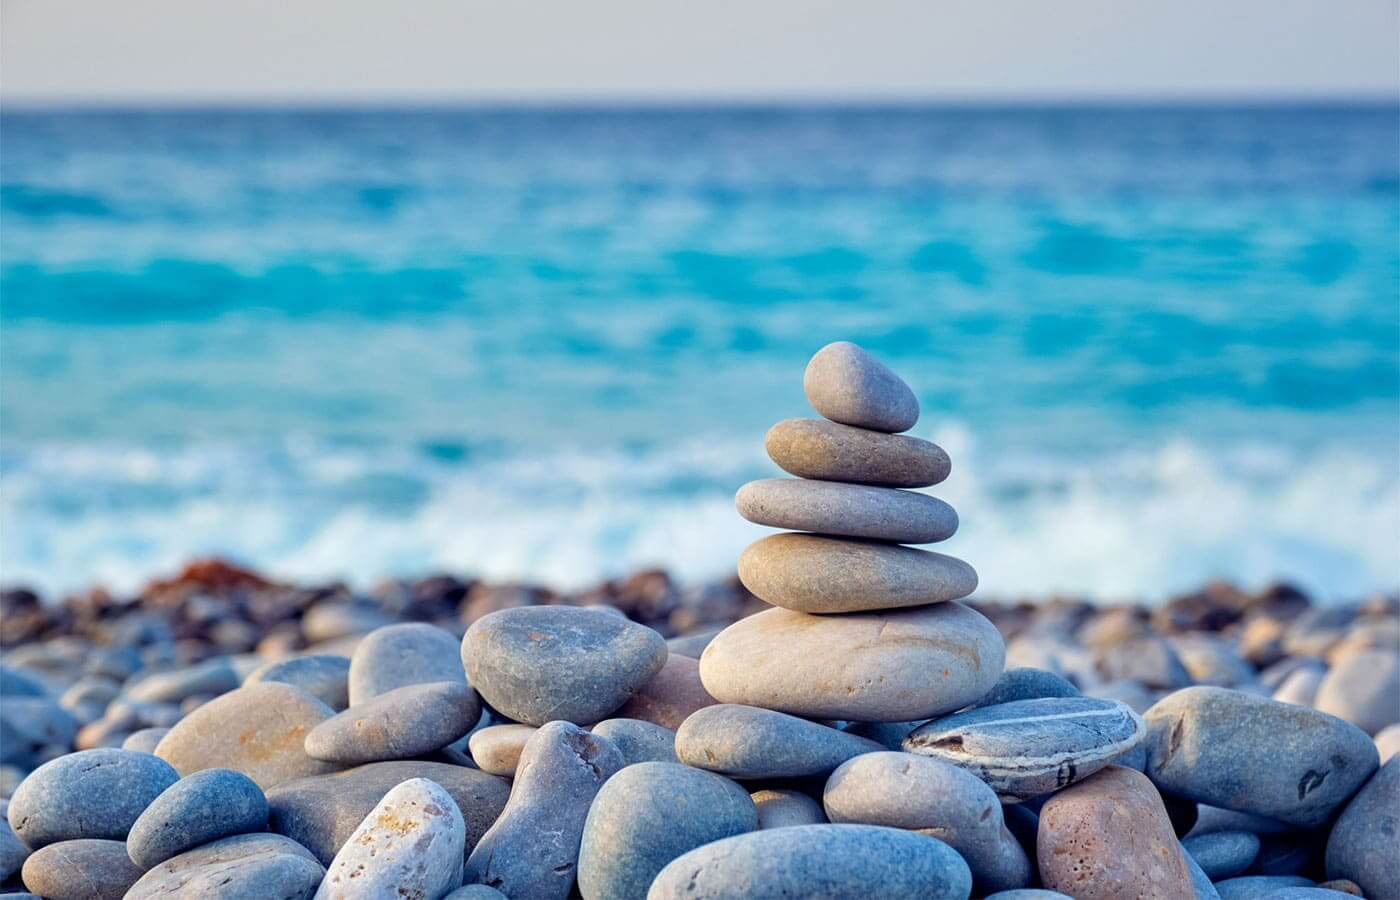 Pile of rocks on a beach being balanced